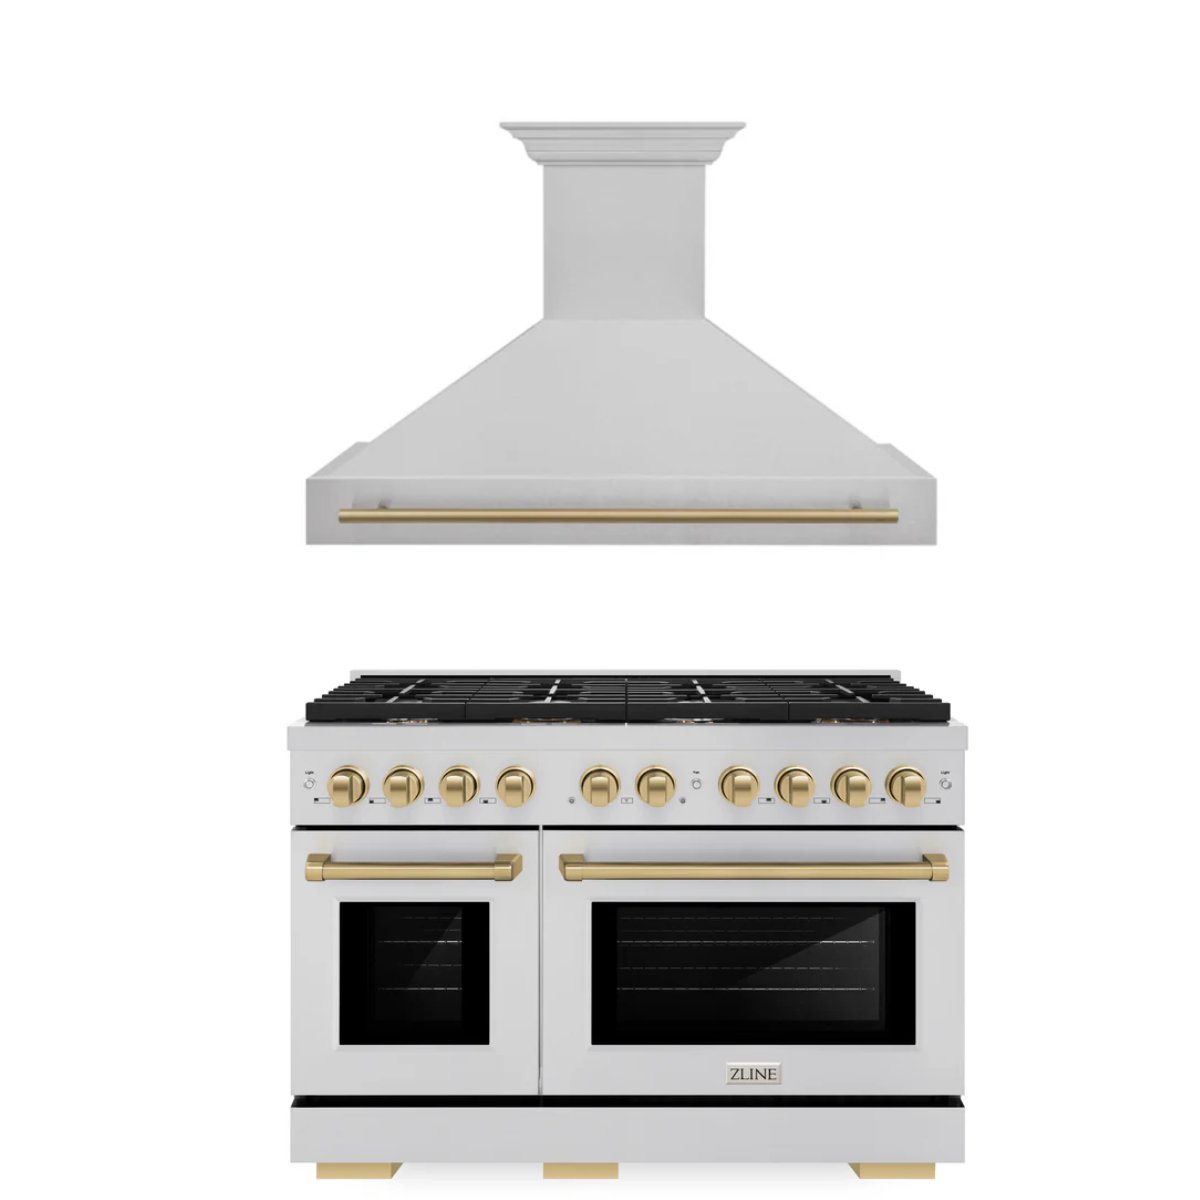 ZLINE Autograph Package - 48 In. Gas Range and Range Hood in DuraSnow® Stainless Steel with Champagne Bronze Accents, 2AKPR-RGSRH48-CB